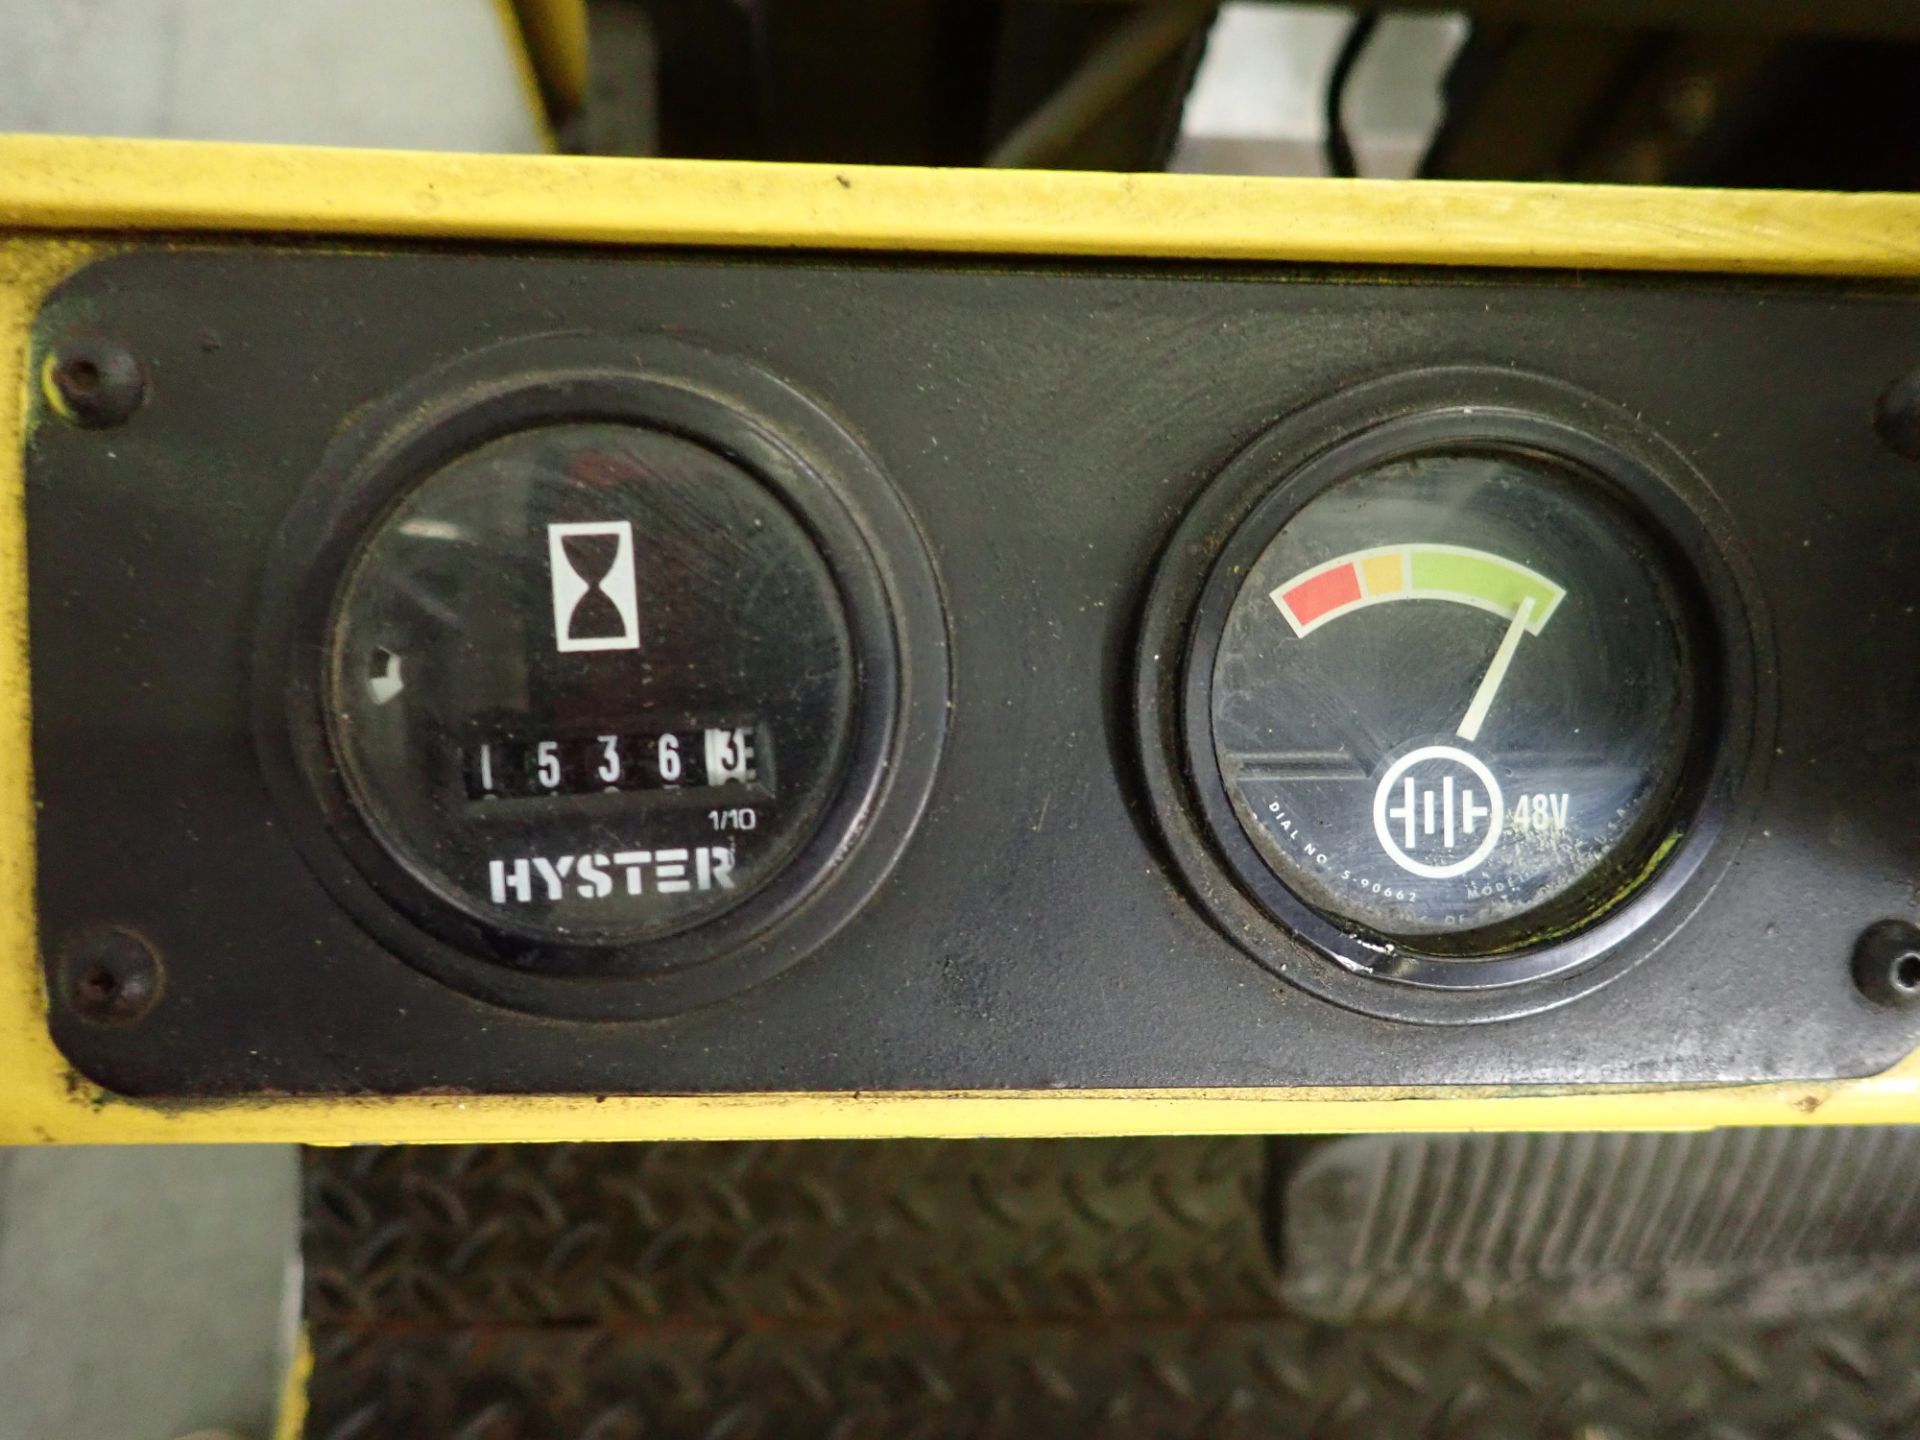 Hyster E80XL Electric Lift Truck with Trojan Odyssey Charger and Extensions - Image 2 of 3